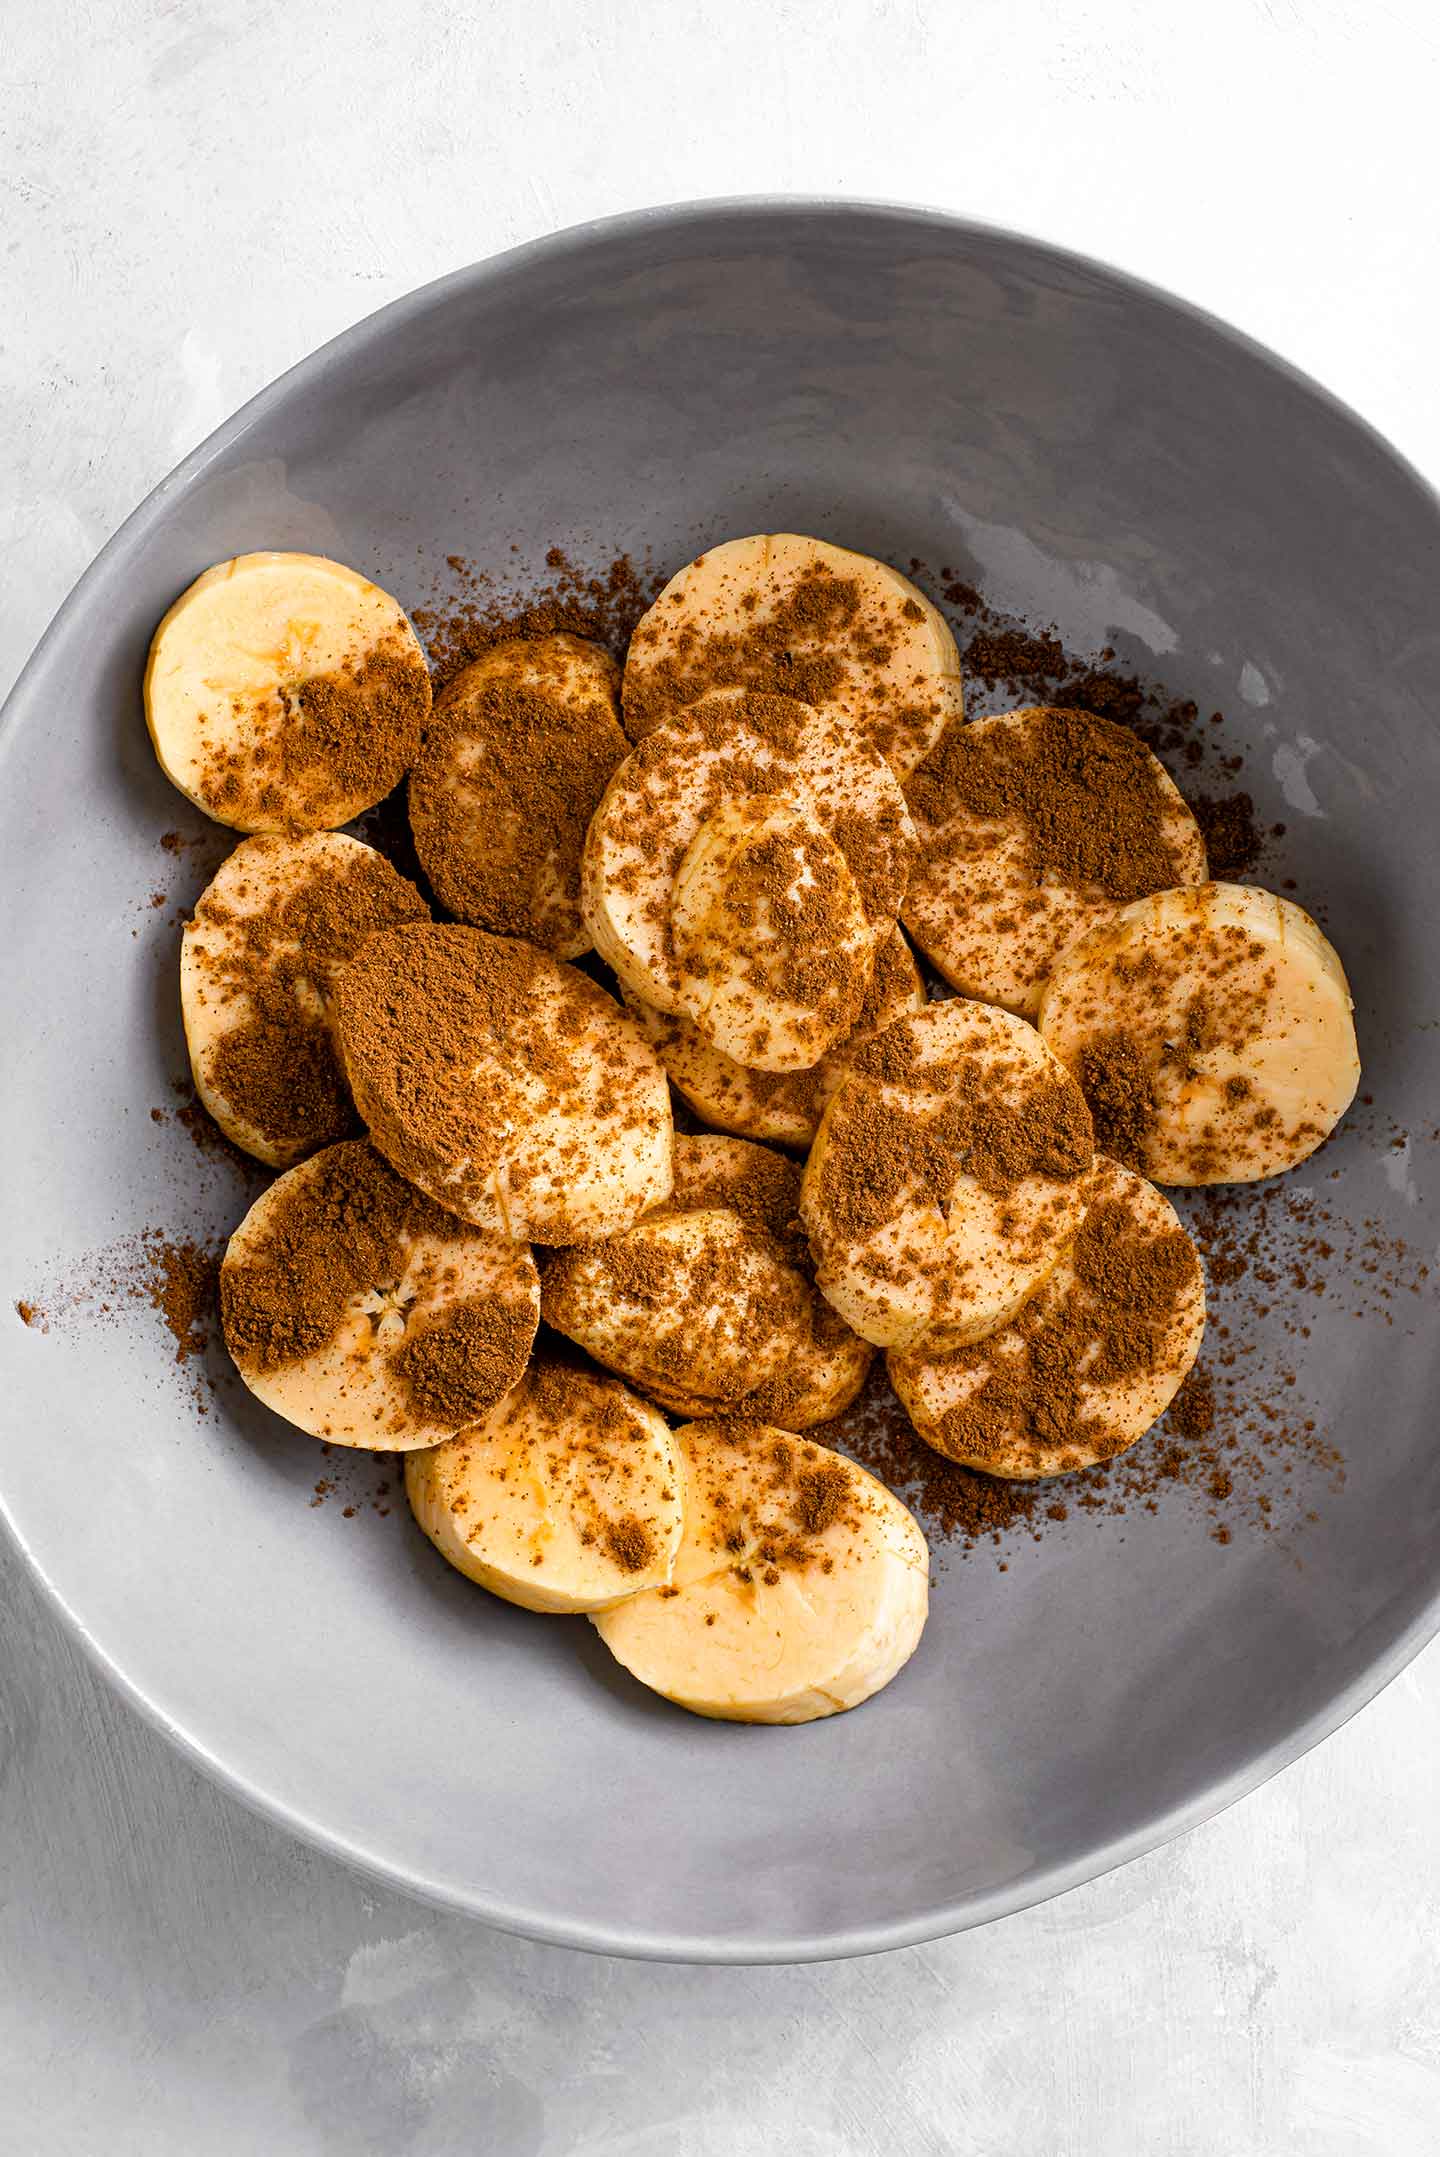 Top down view of ripe plantain slices in a shallow dish dusted with cinnamon and drizzled with maple syrup.